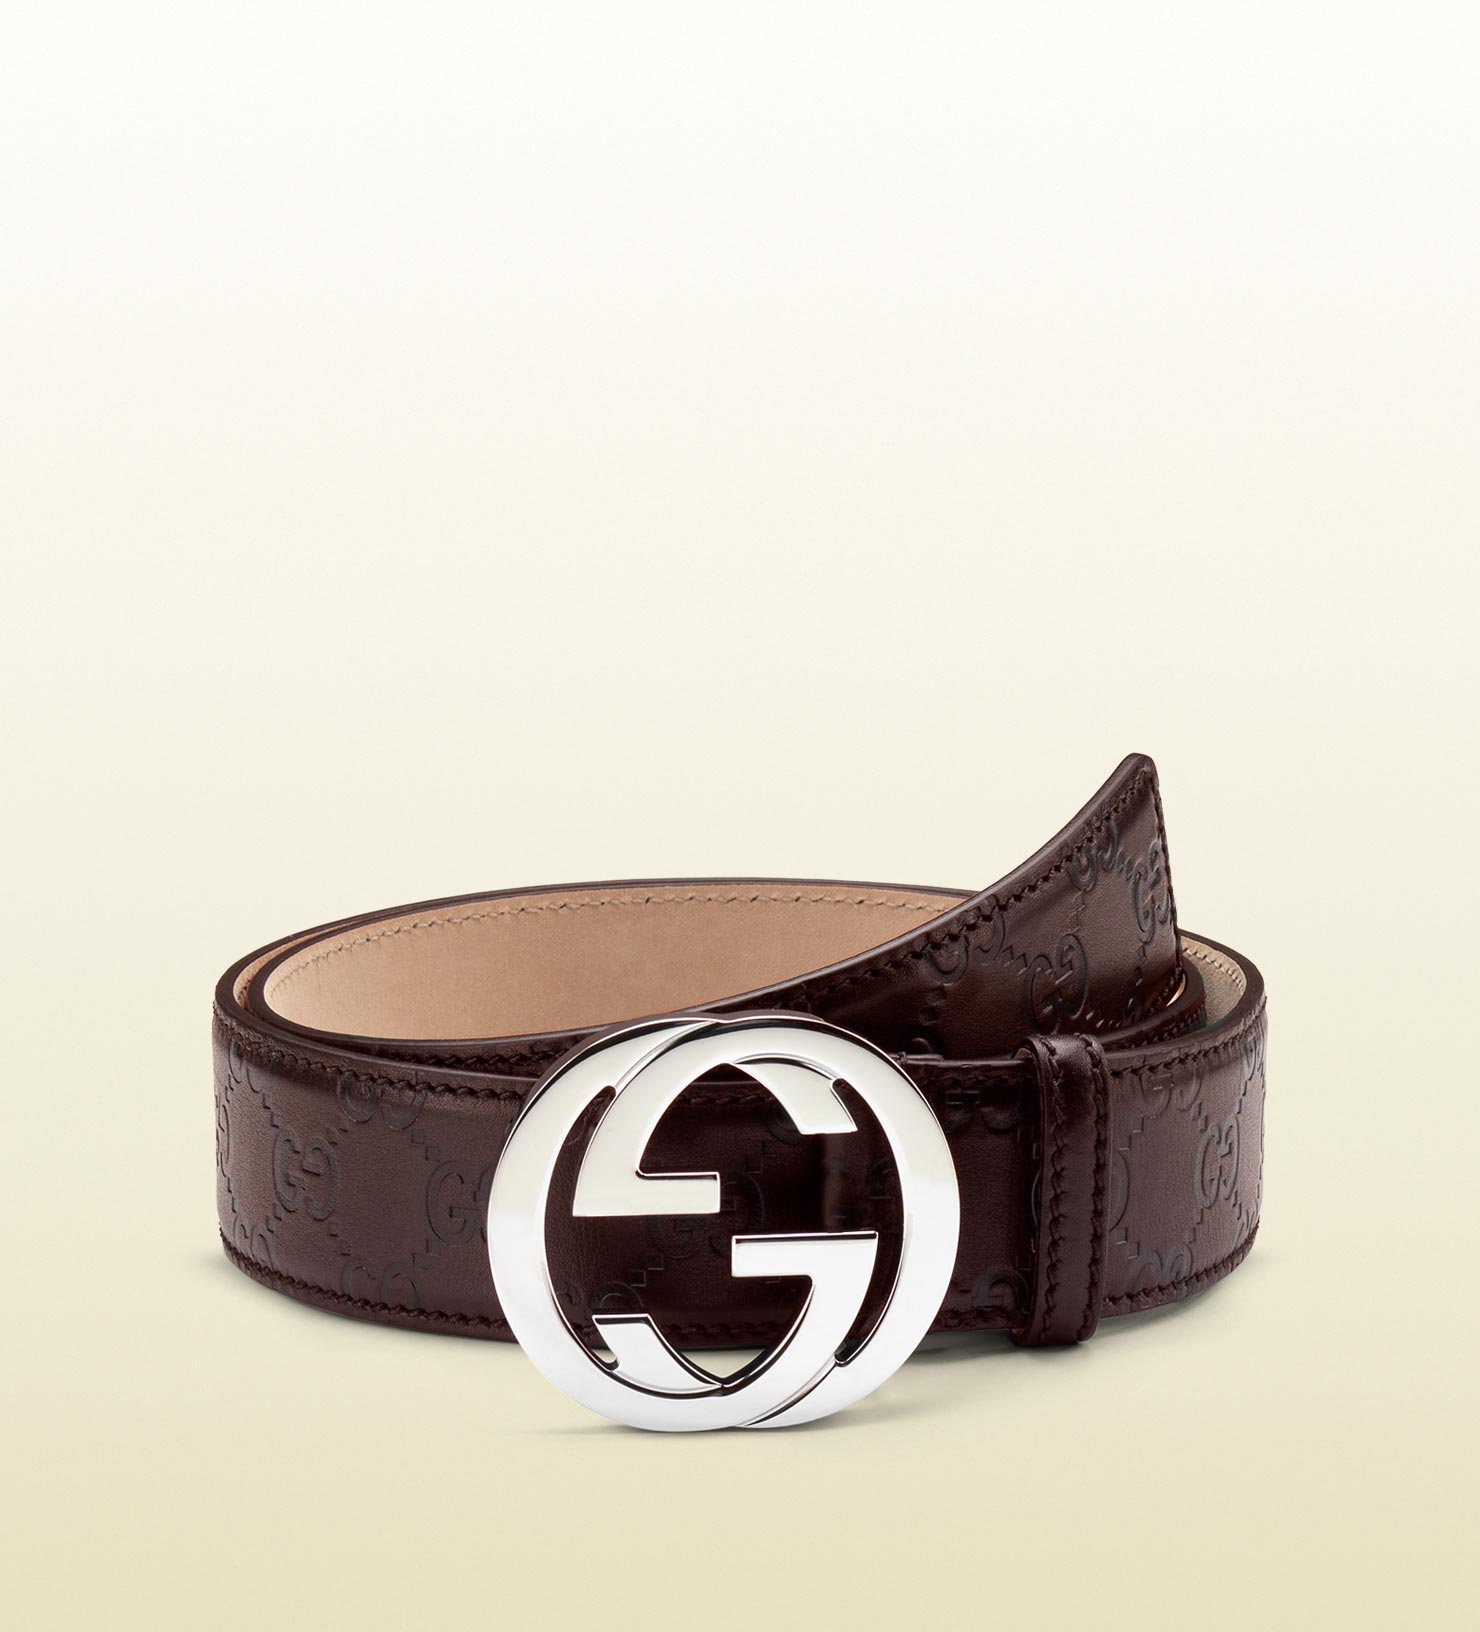 Lyst - Gucci Ssima Leather Belt With Interlocking G Buckle in Brown for Men